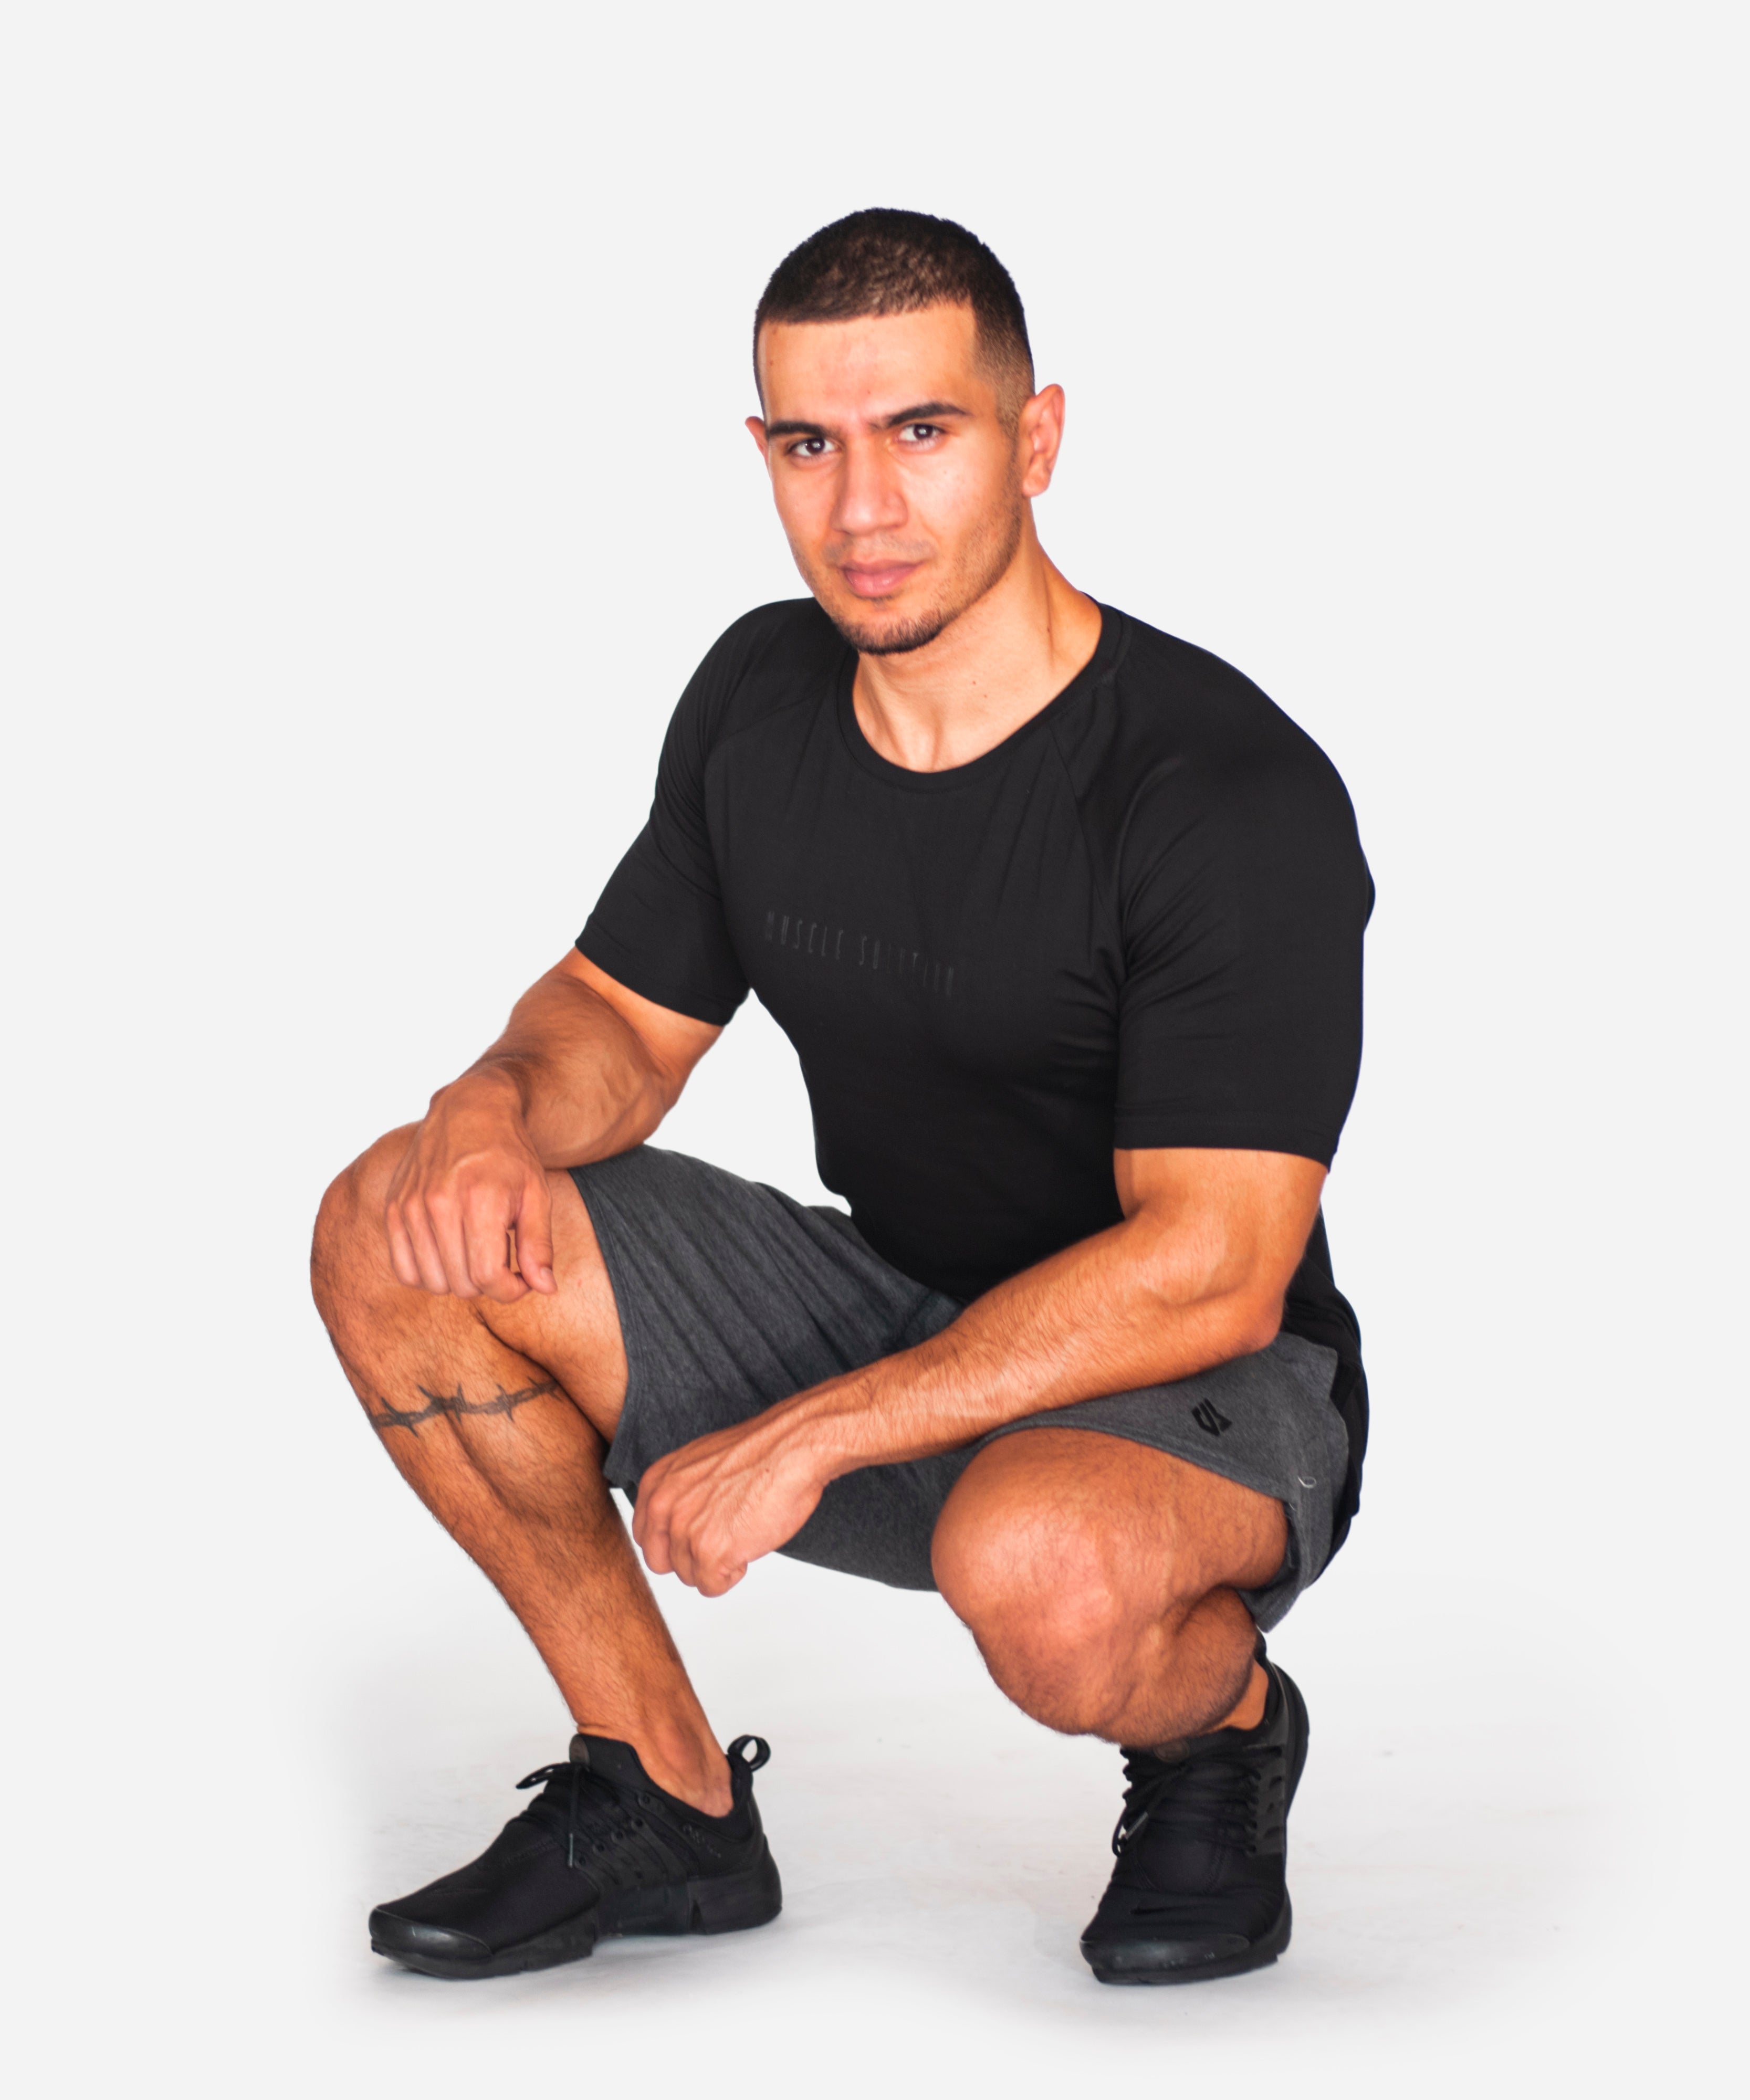 Muscle Solution Muscle TEE